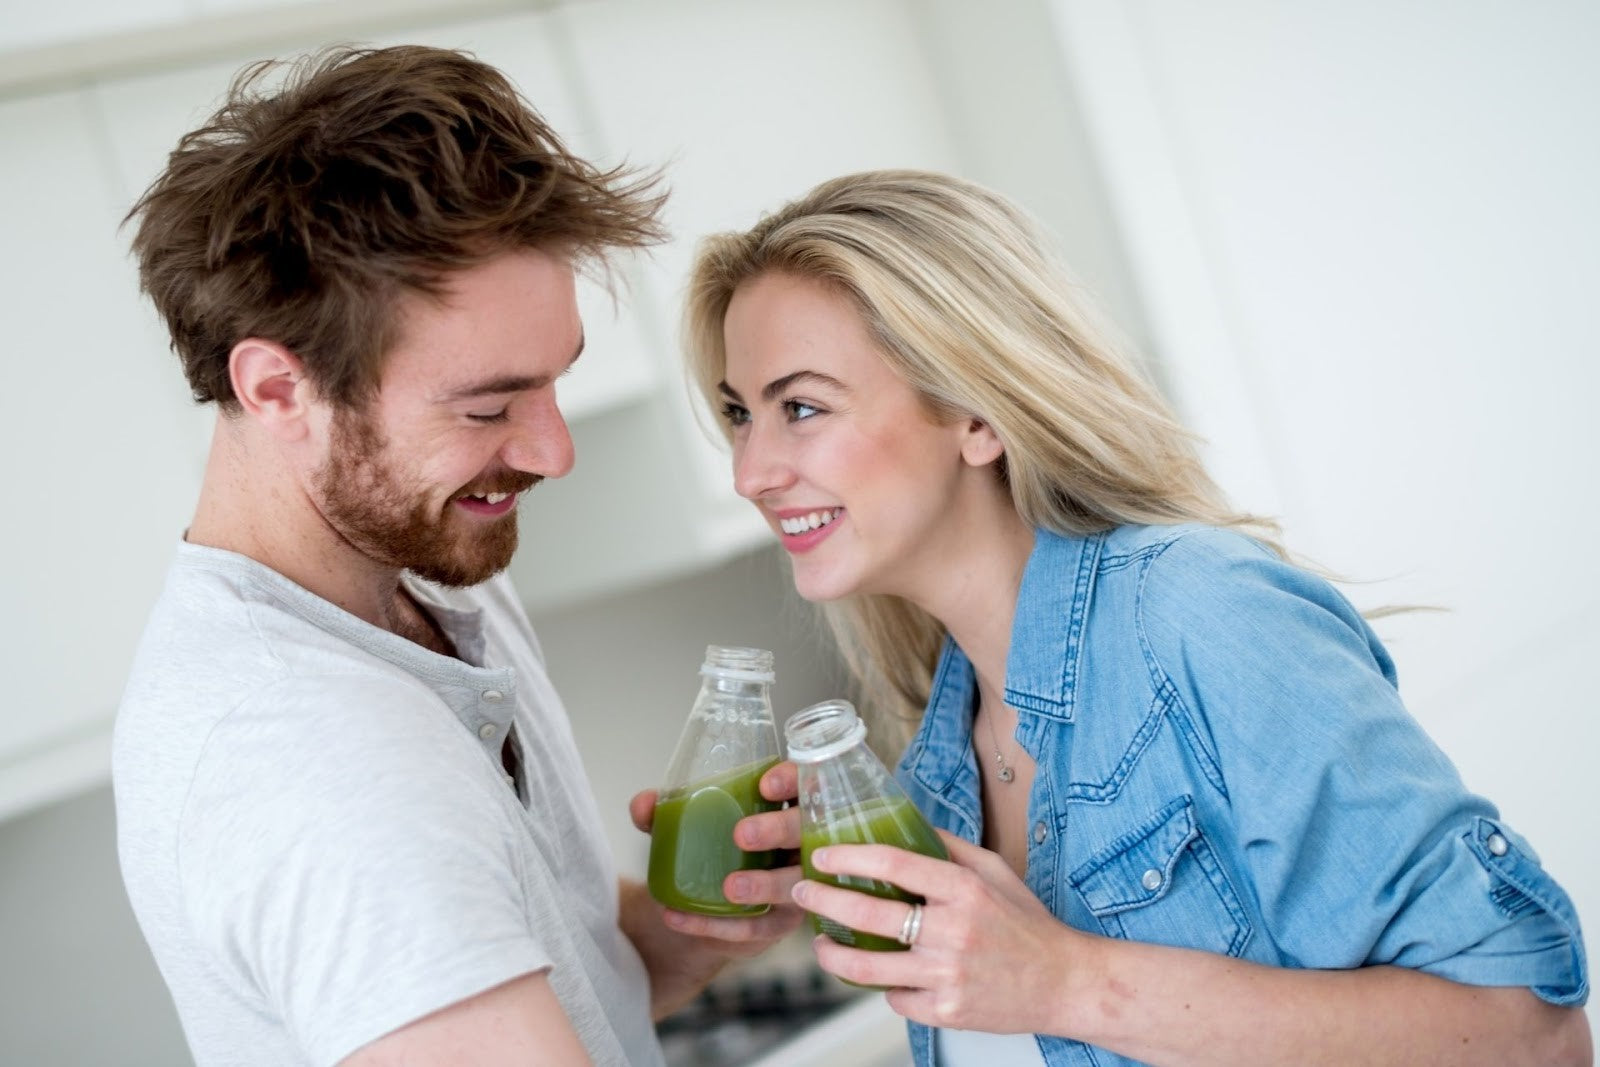 A man and a woman smiling at each other while holding bottles of green juice